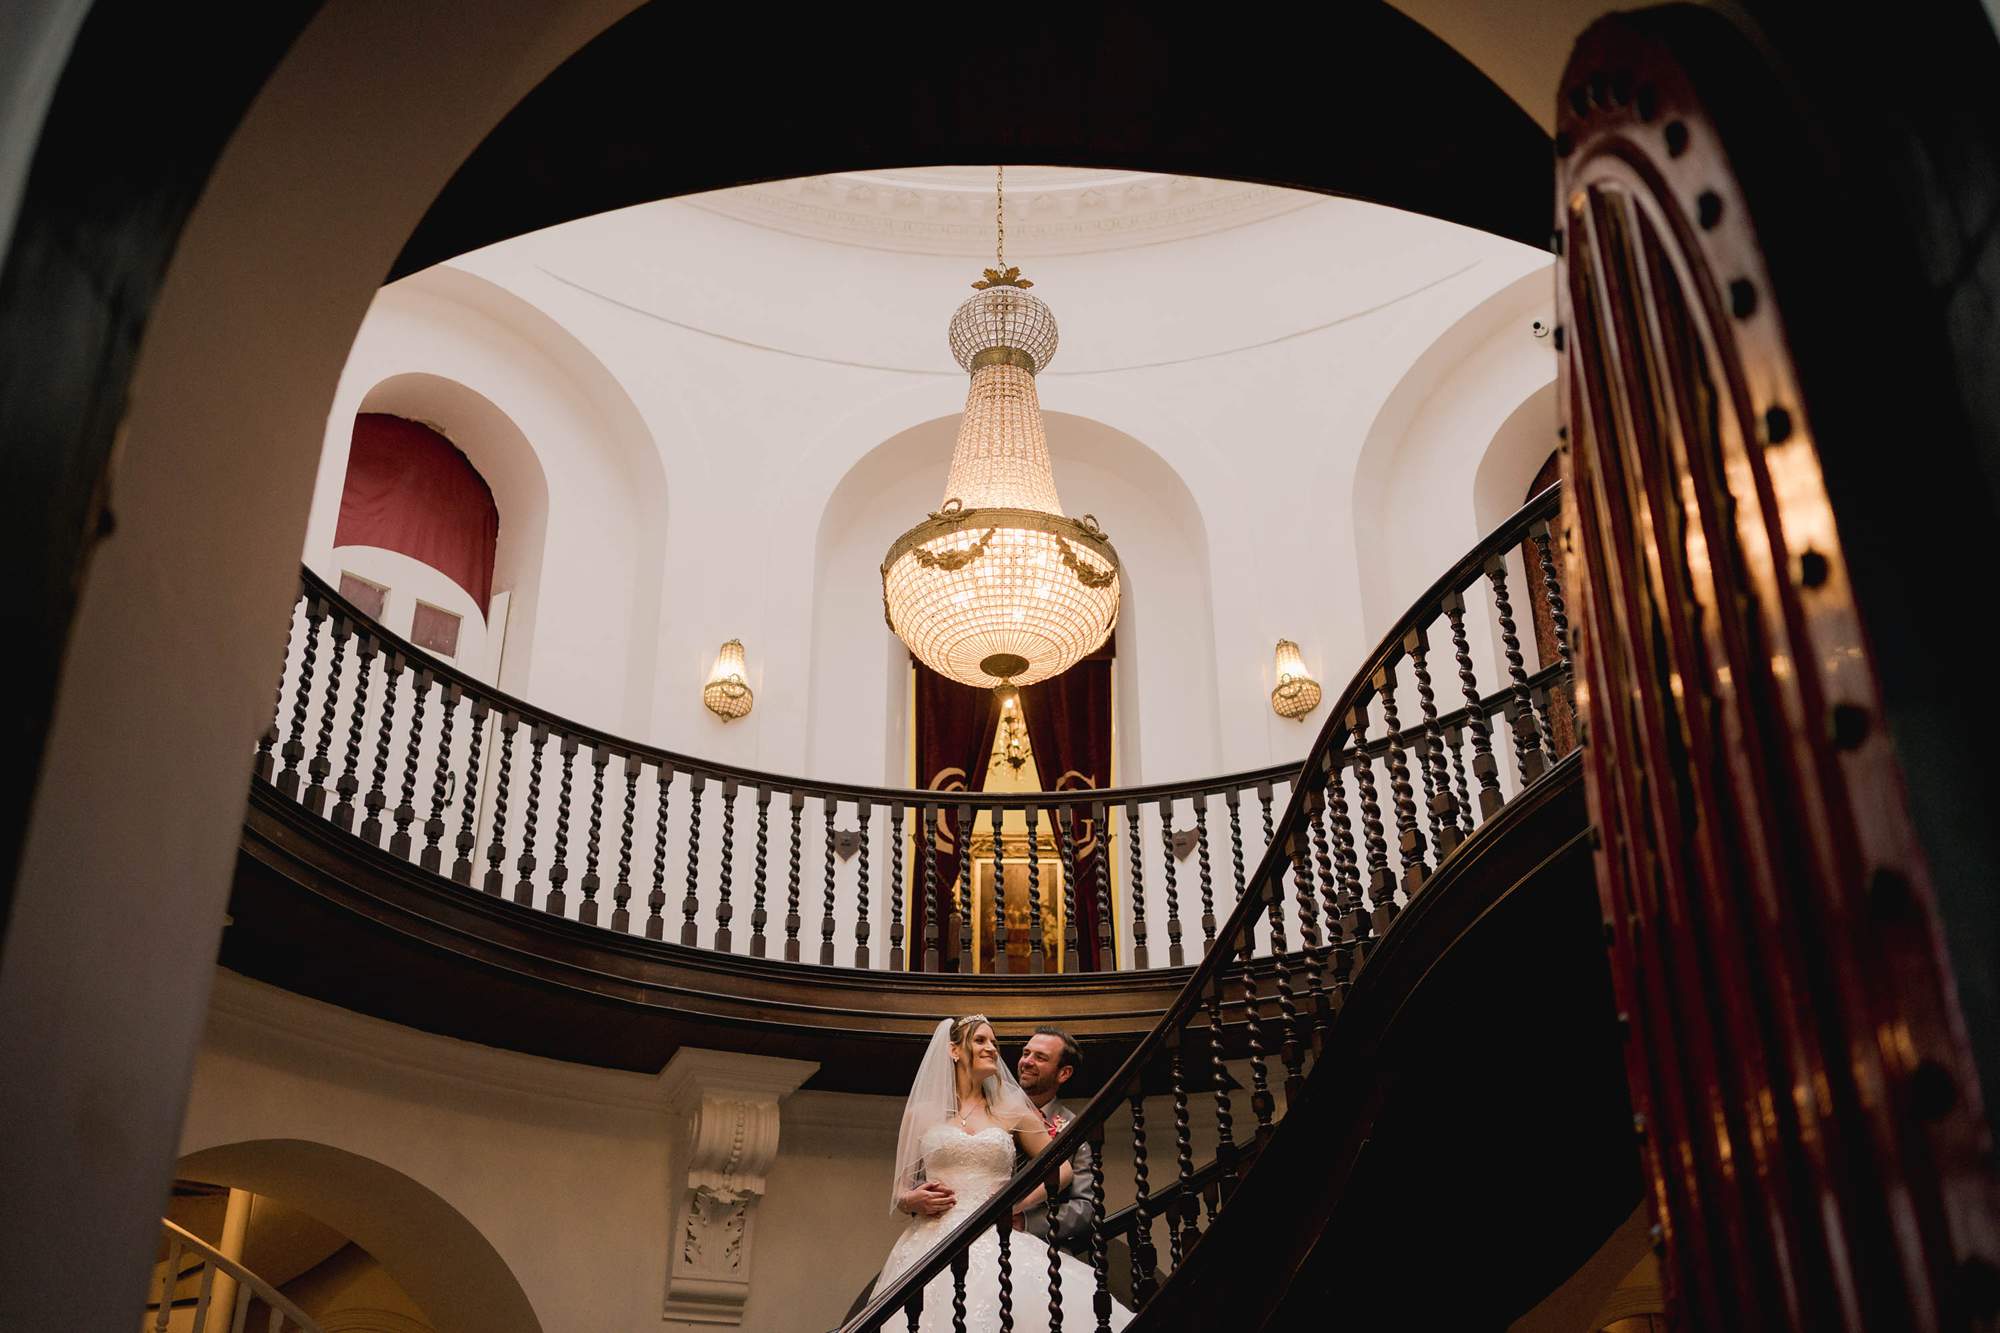 Castle Goring with a bride and groom stood on the stairs.